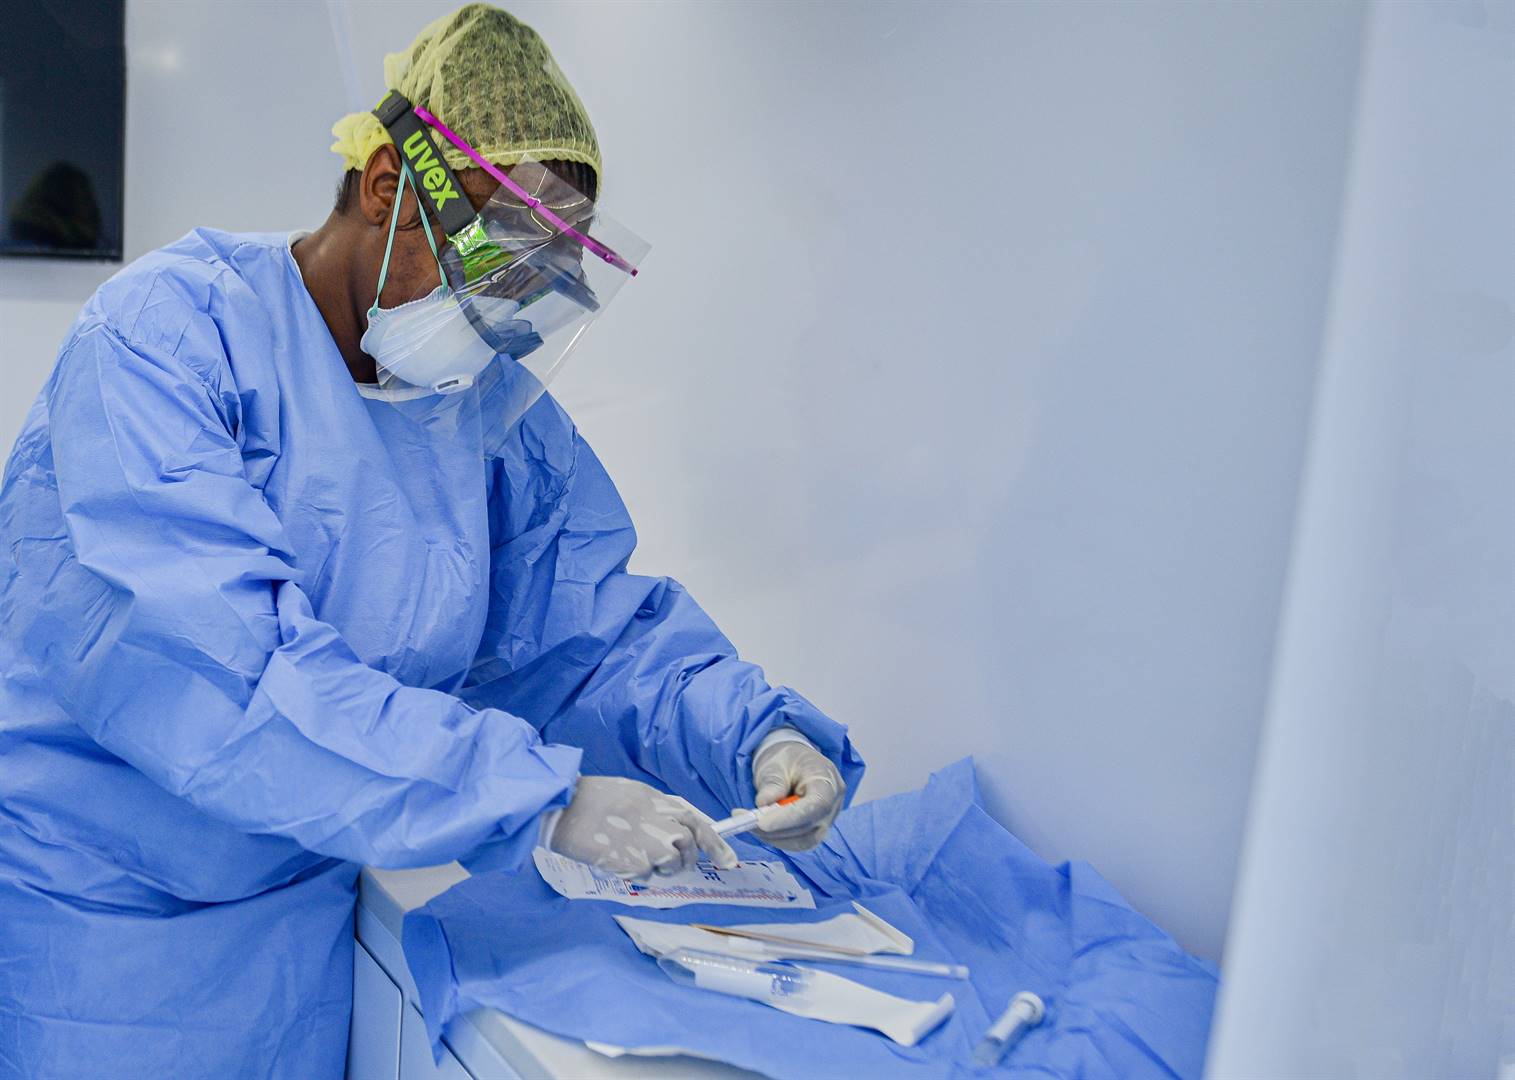 A doctor in protective gear prepares her equipment before testing a patient for Covid 19.